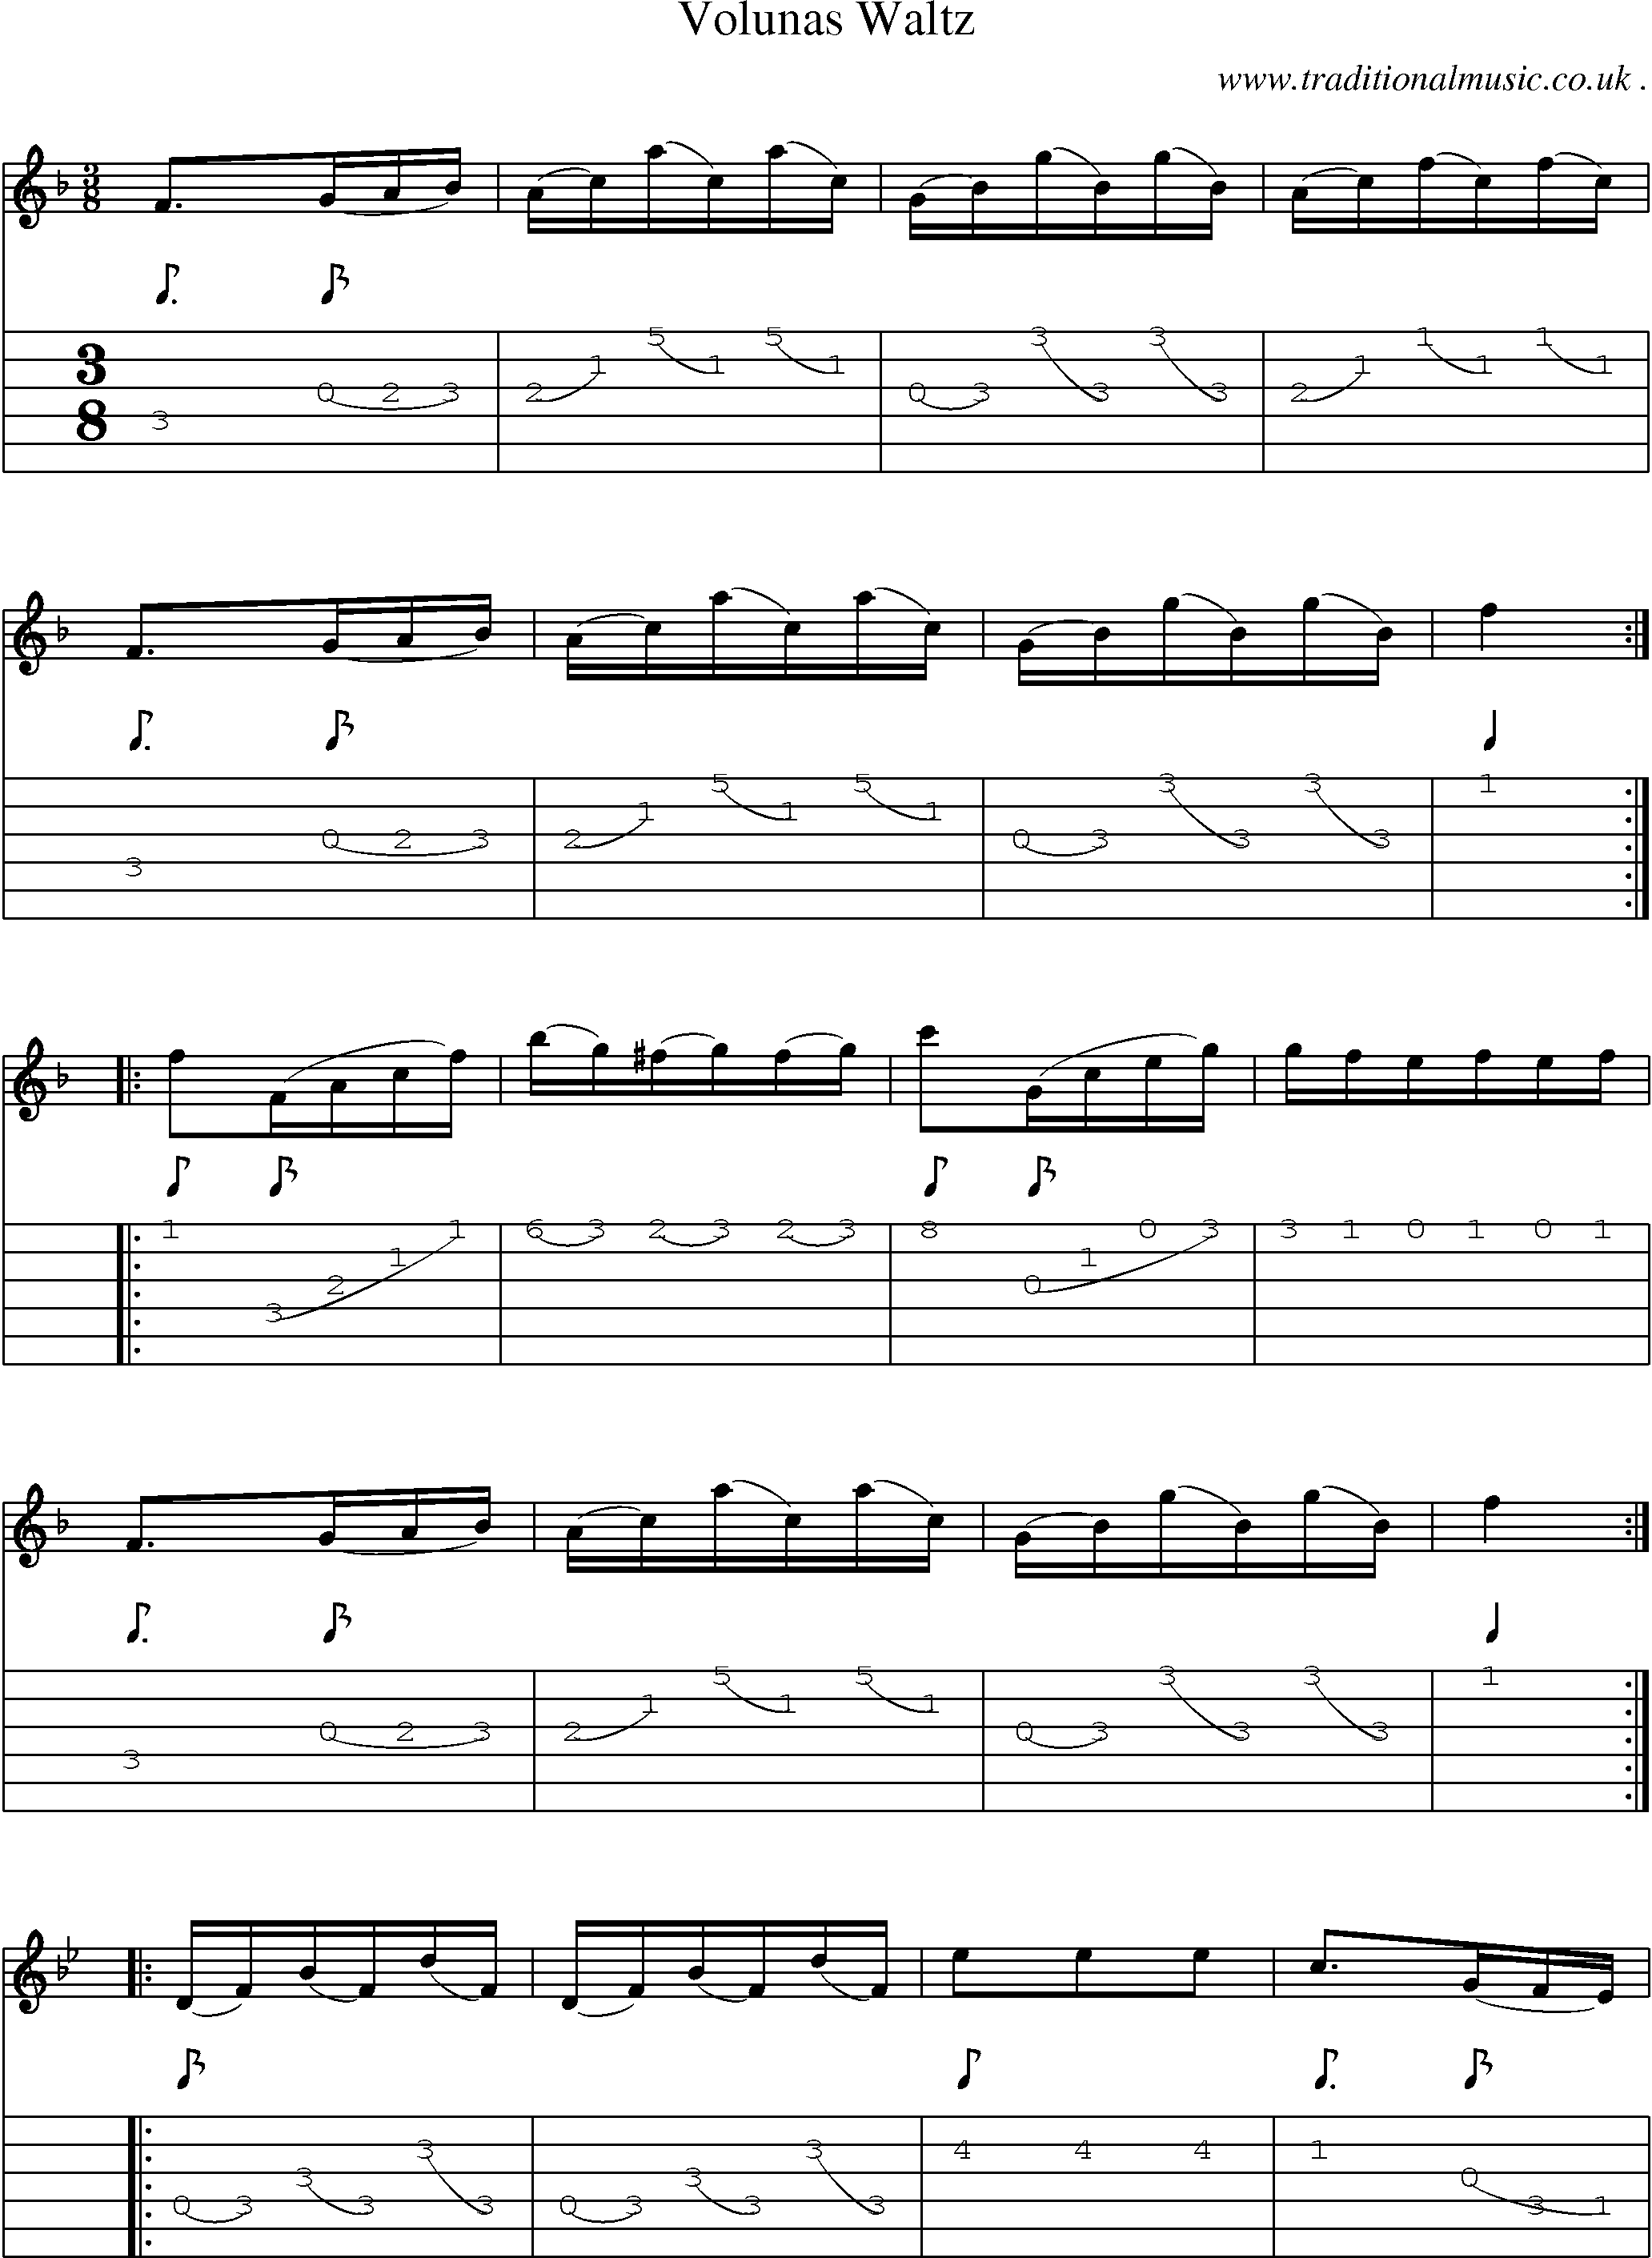 Sheet-Music and Guitar Tabs for Volunas Waltz